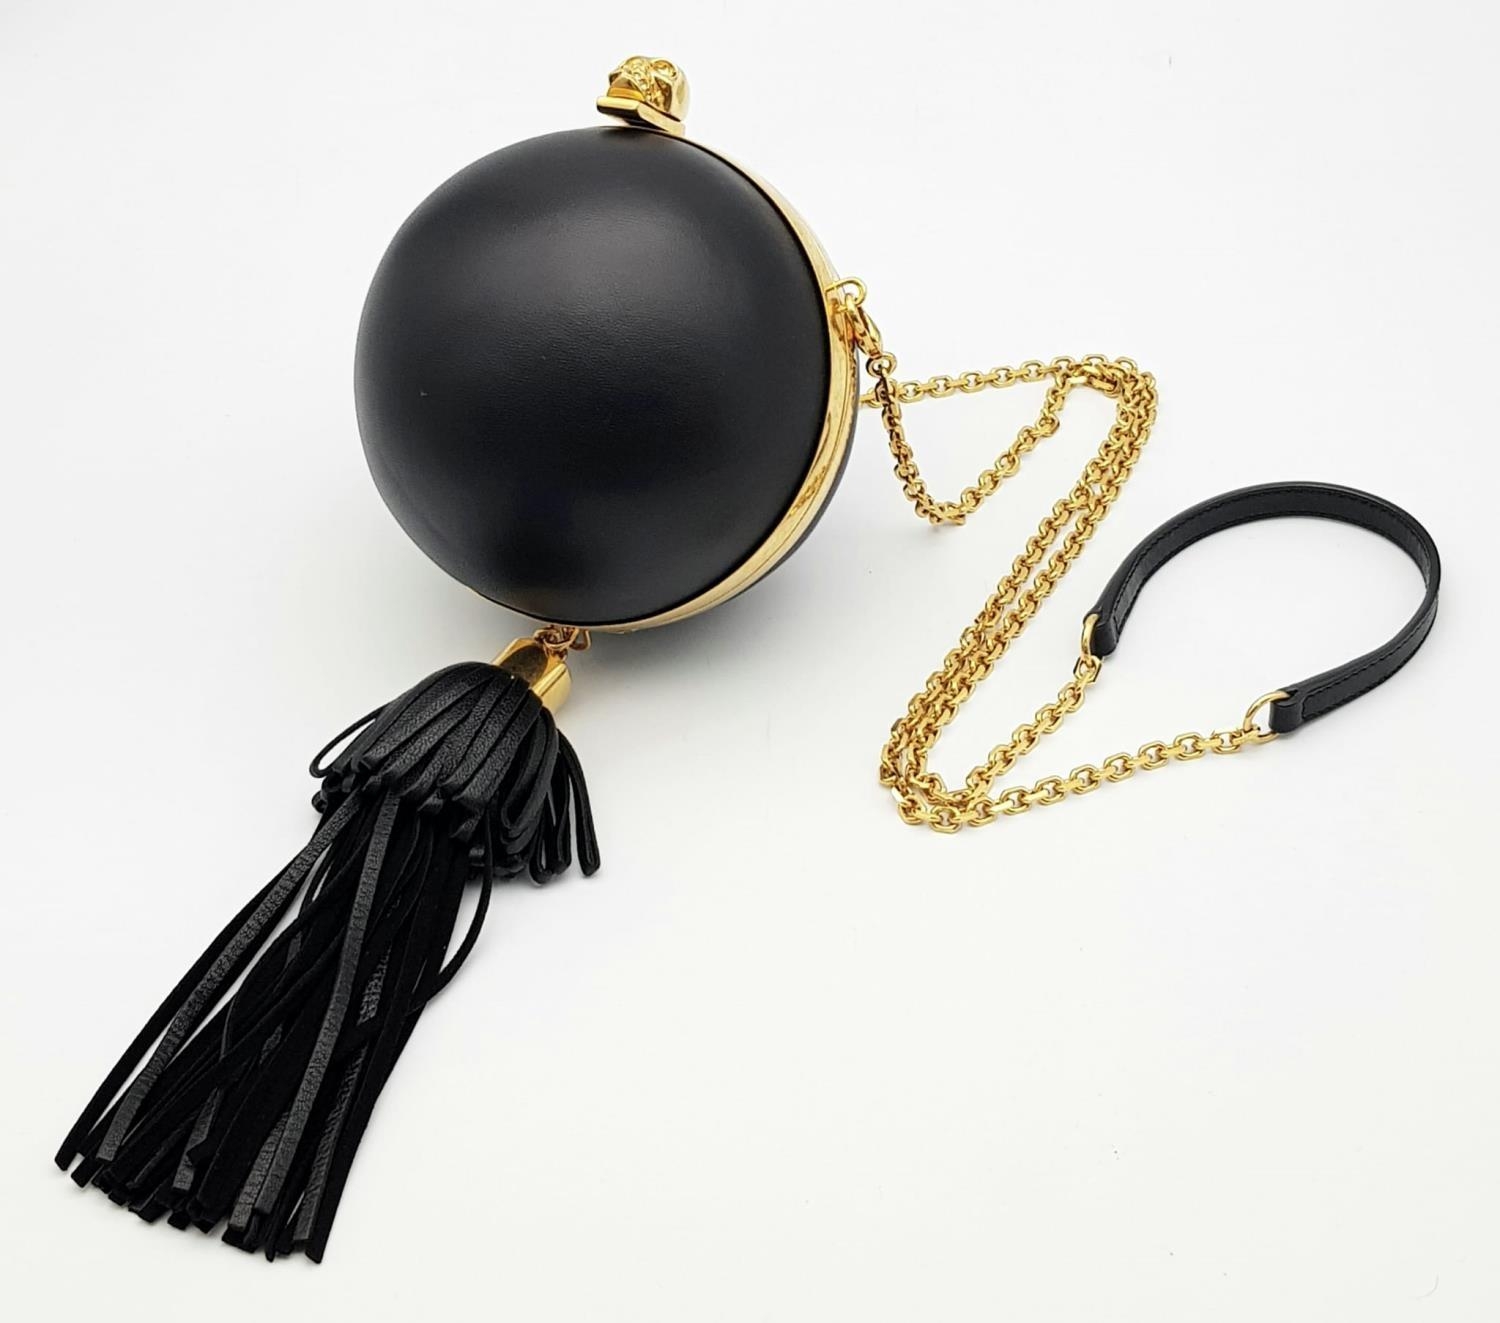 An Alexander Mcqueen Skull Ball Clutch Bag. Black leather exterior with gold tone hardware. - Image 2 of 6